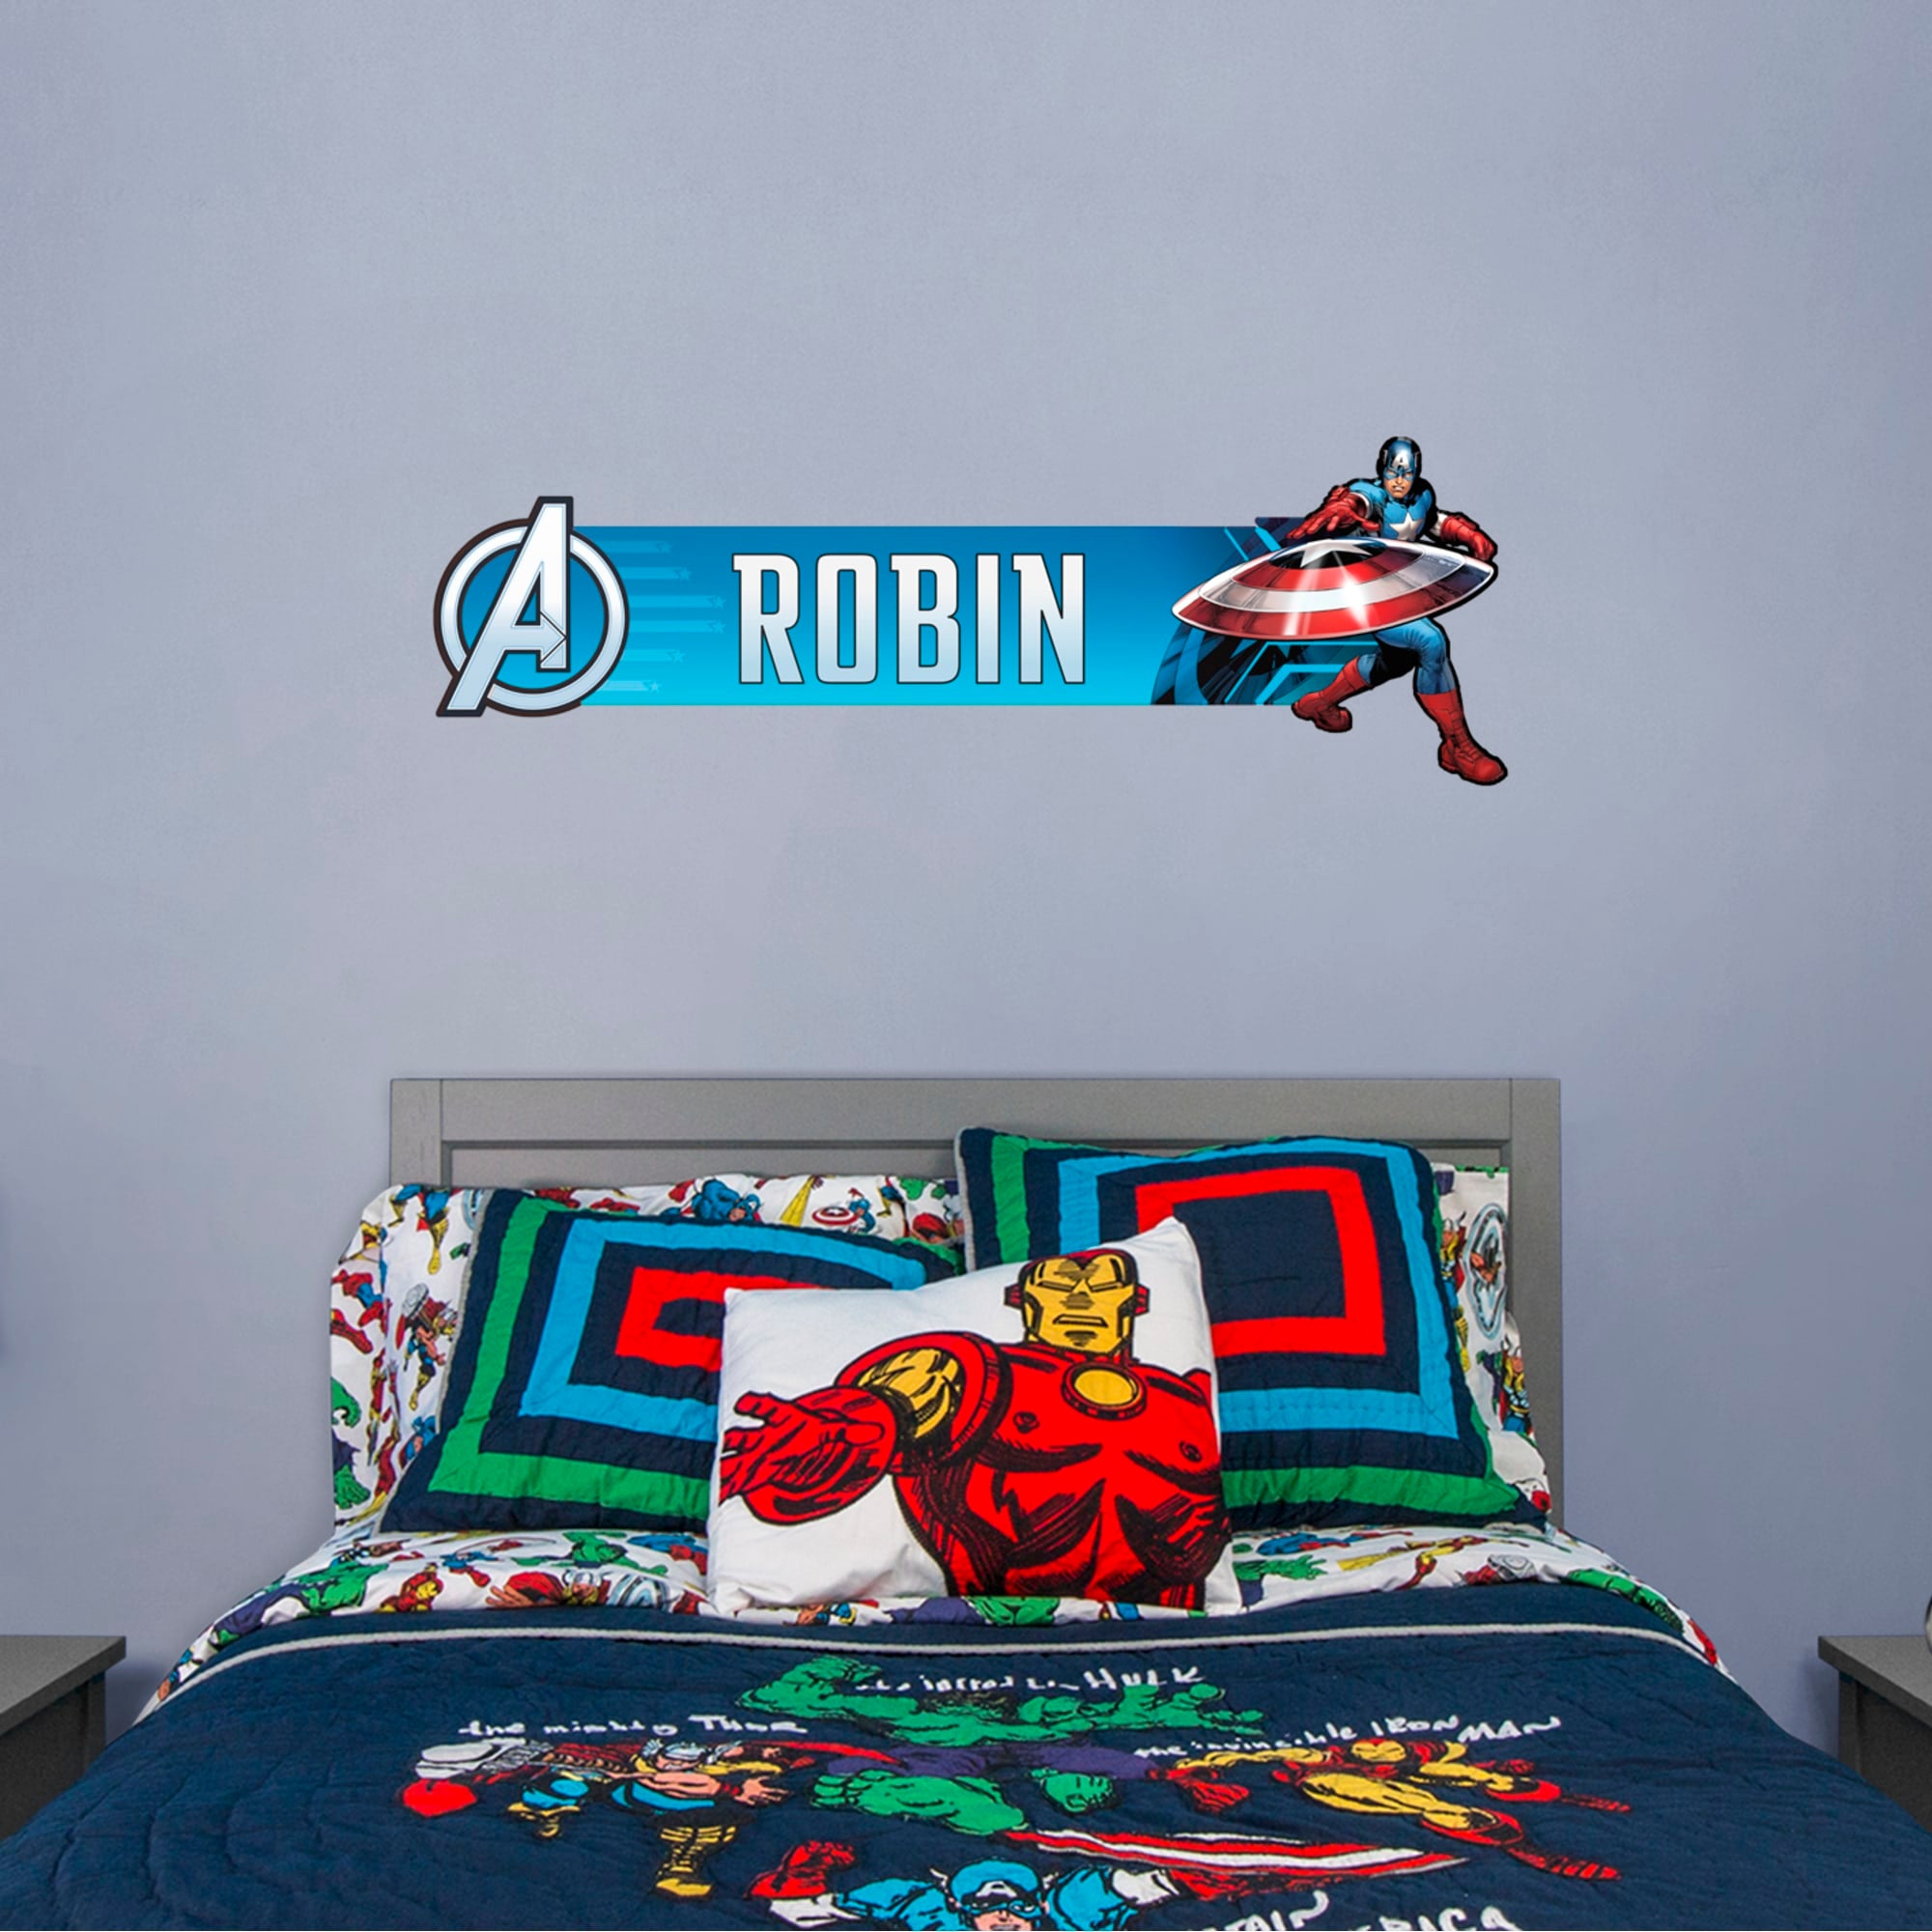 Captain America: Personalized Name - Officially Licensed Removable Wall Decal 52.0"W x 39.5"H by Fathead | Vinyl